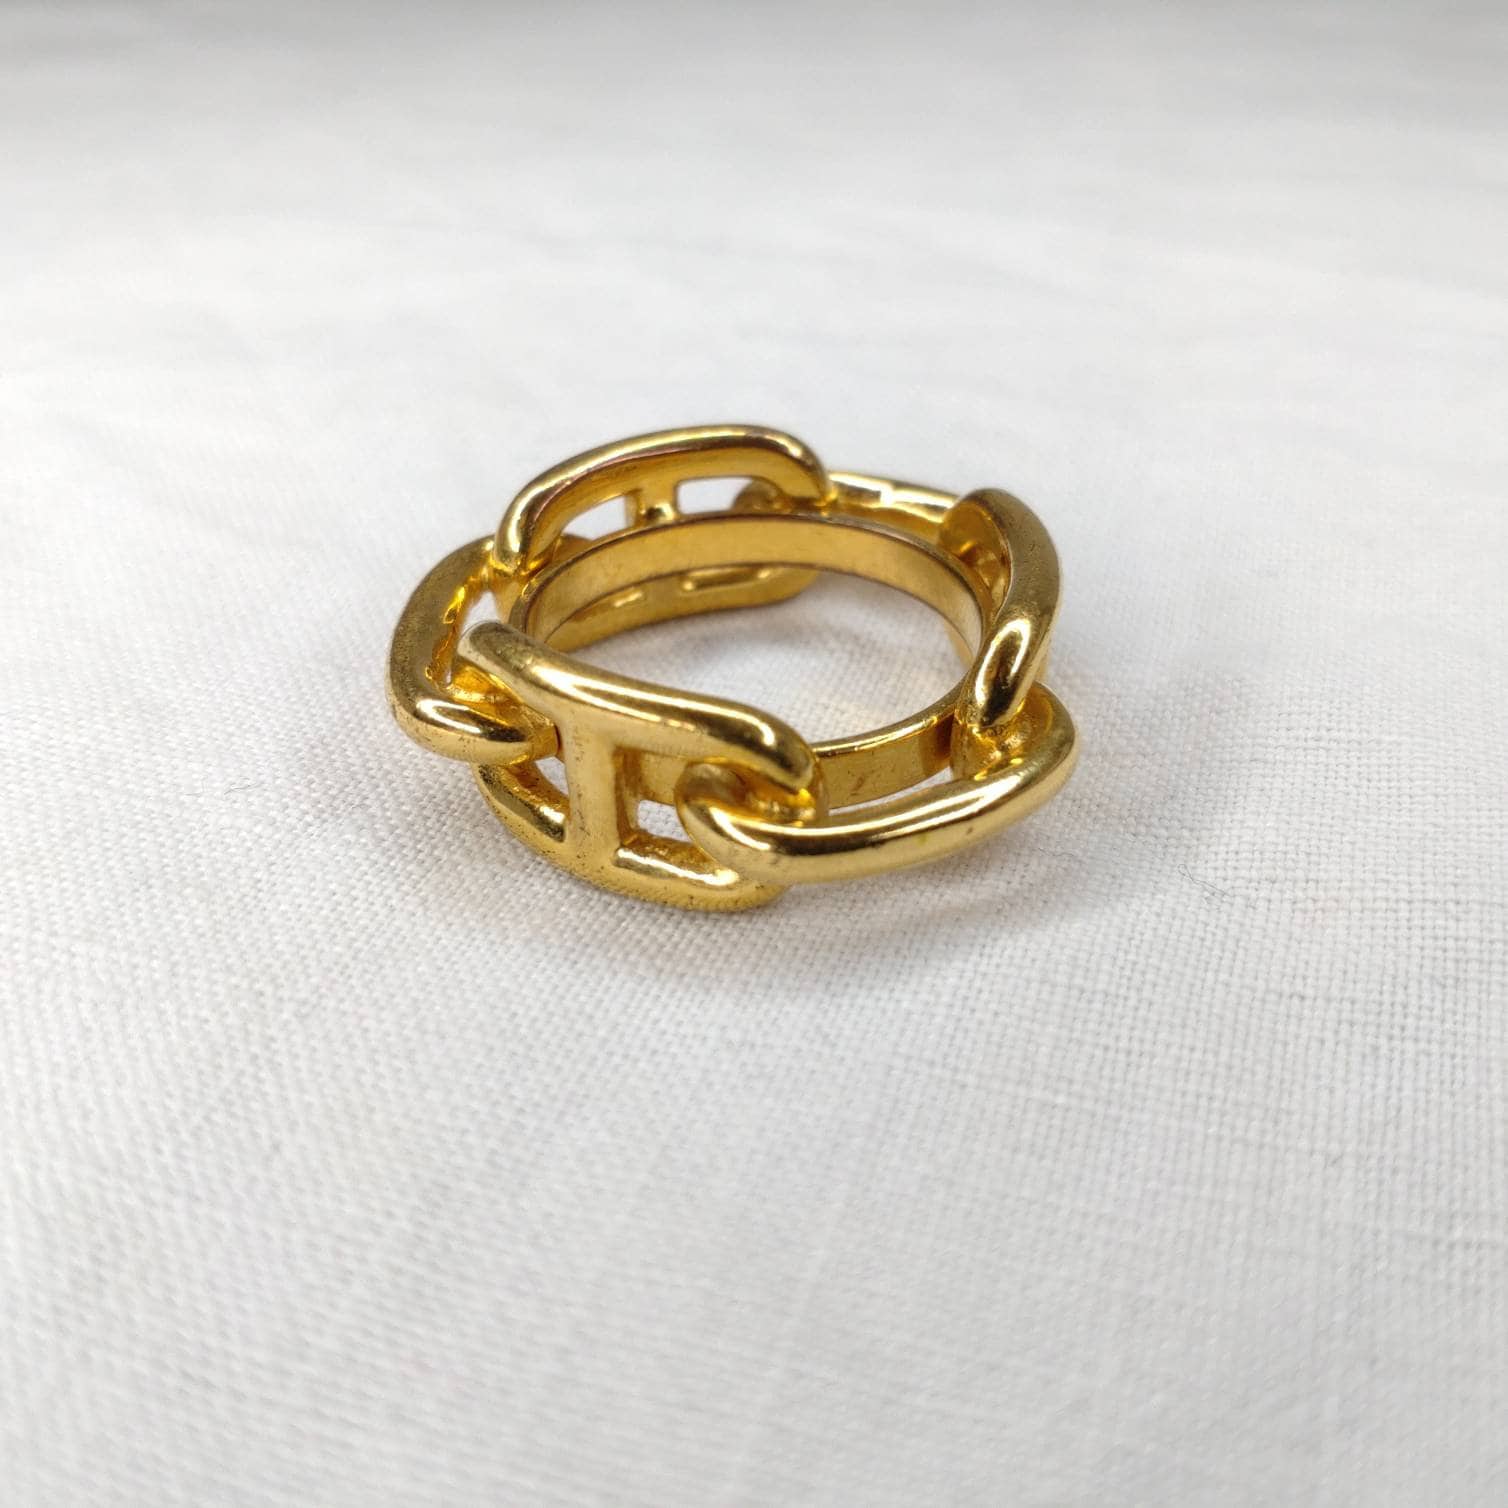 HERMES | Scarf ring 24 carat gold-plated anchor chain